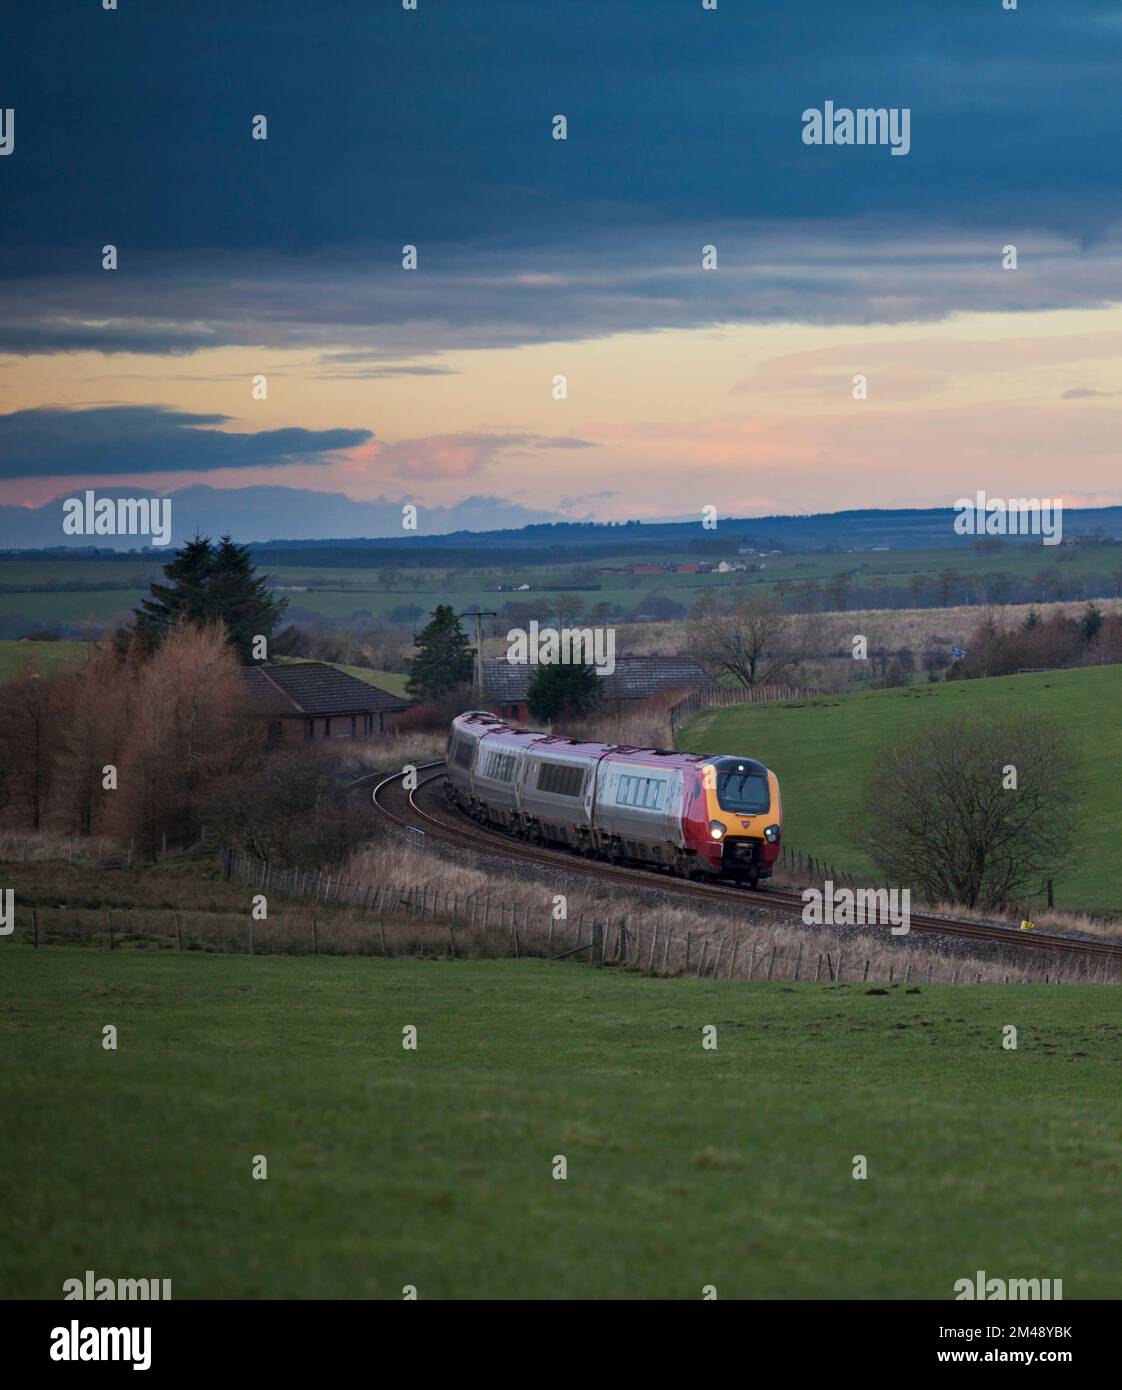 Virgin Trains class 221 voyager train passing Polquip, in rural southern Scotland with a diverted Anglo Scottish train Stock Photo